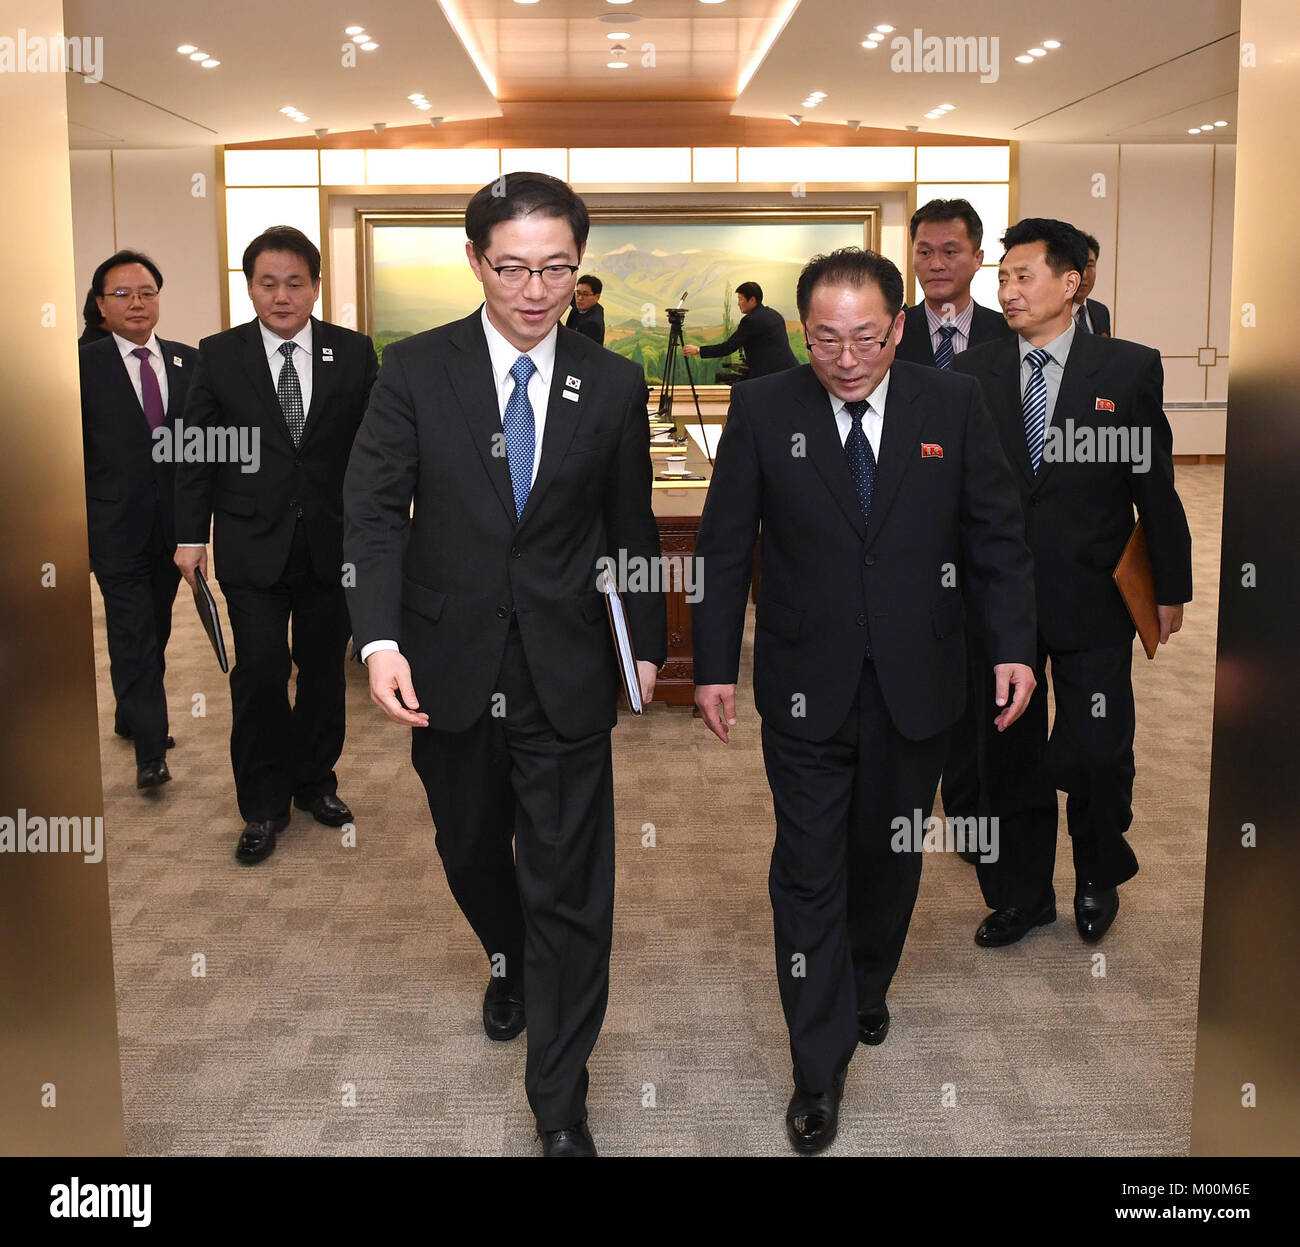 (180117) -- SEOUL, Jan. 17, 2018 (Xinhua) -- Chun Hae-sung (L, front), vice unification minister of South Korea, and Jon Jong Su (R, front), vice chairman of the Committee for the Peaceful Reunification of the Fatherland of the Democratic People's Republic of Korea (DPRK), leave after holding dialogue at Peace House, a building in the South Korean side of Panmunjom, Jan. 17, 2018. South Korea and the DPRK have agreed to jointly march at the opening ceremony of the South Korea-hosted Winter Olympics and to cheer together for both athletes of the two Koreas during the Olympic period, Seoul's uni Stock Photo